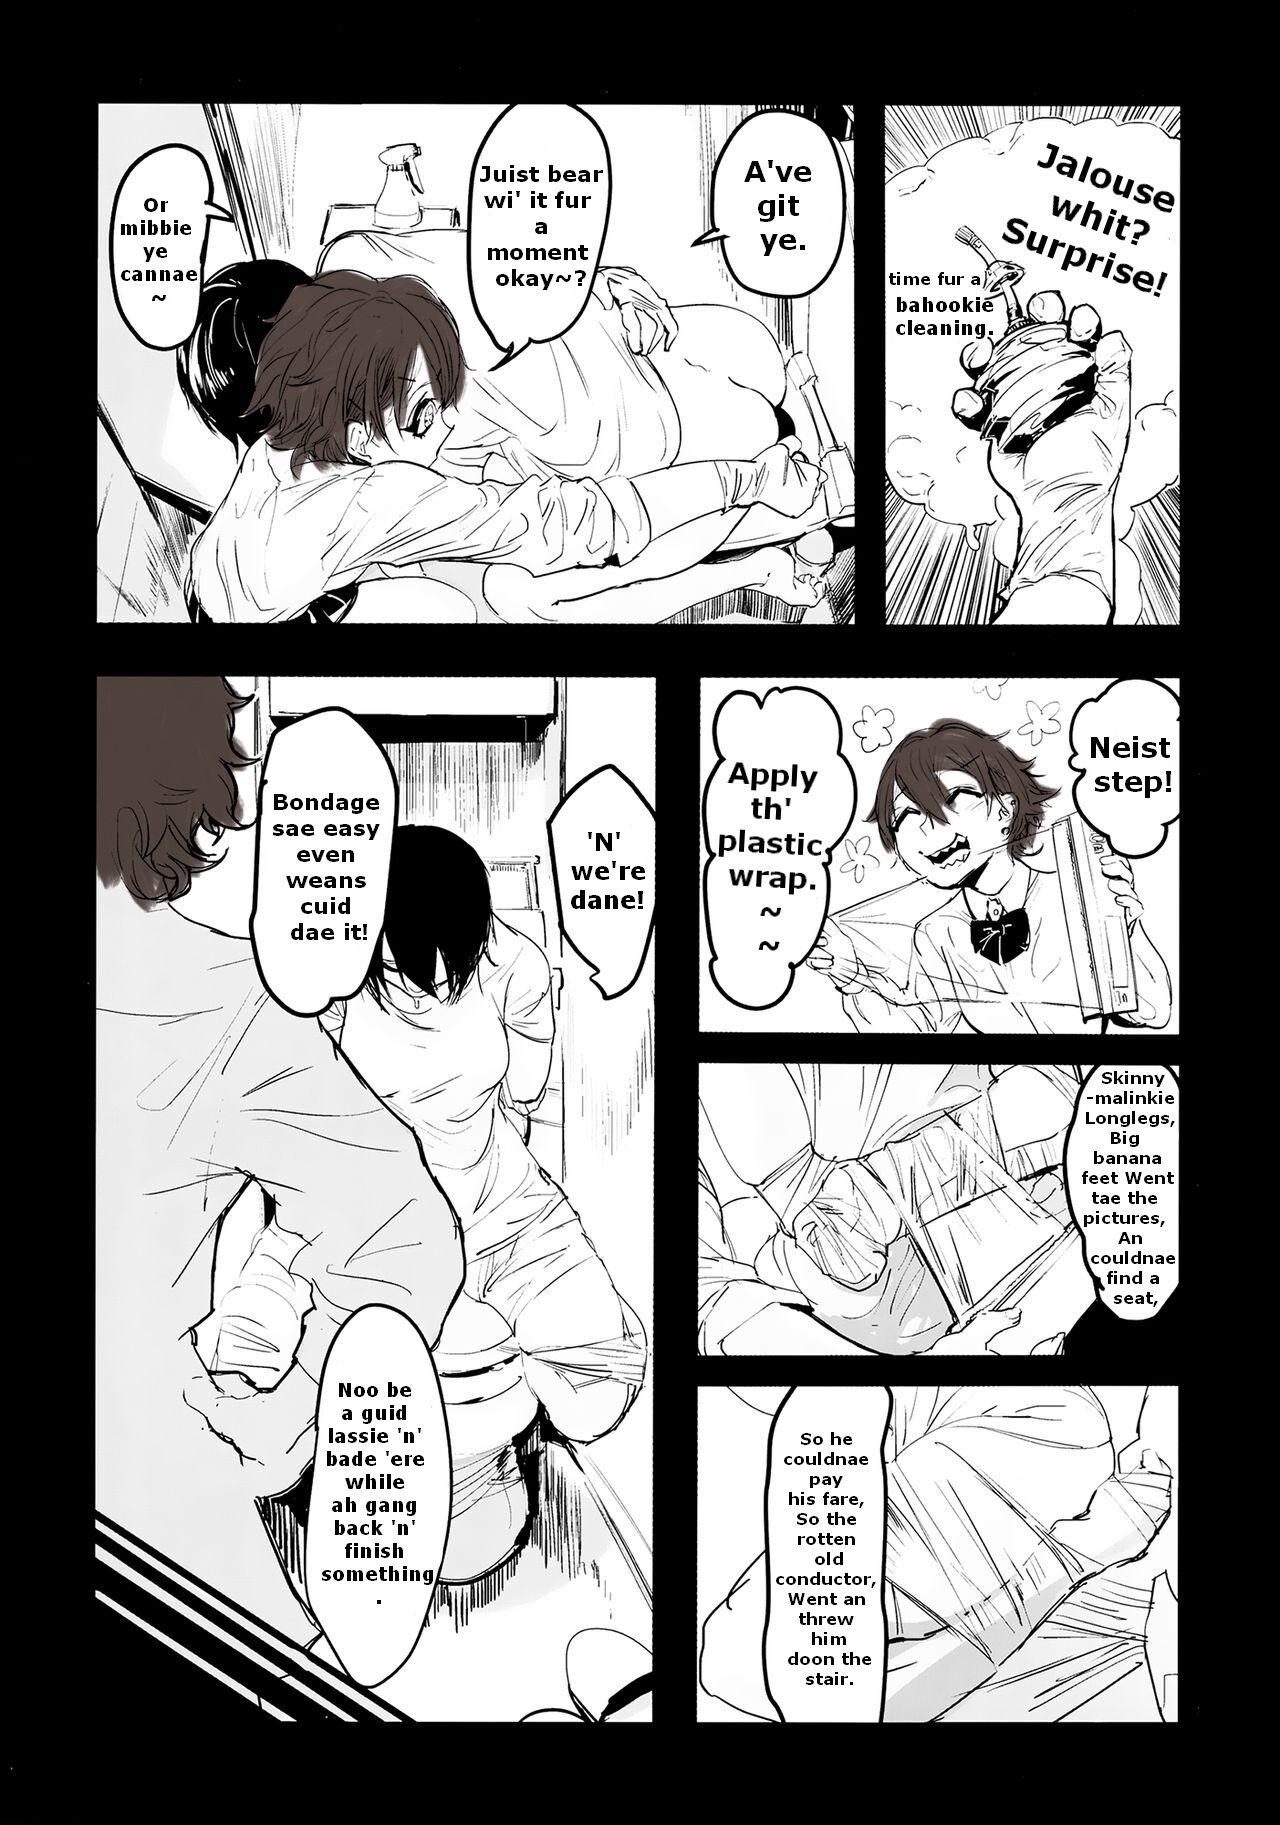 People Having Sex Draw a Winner, Get One More! - Original Lips - Page 7